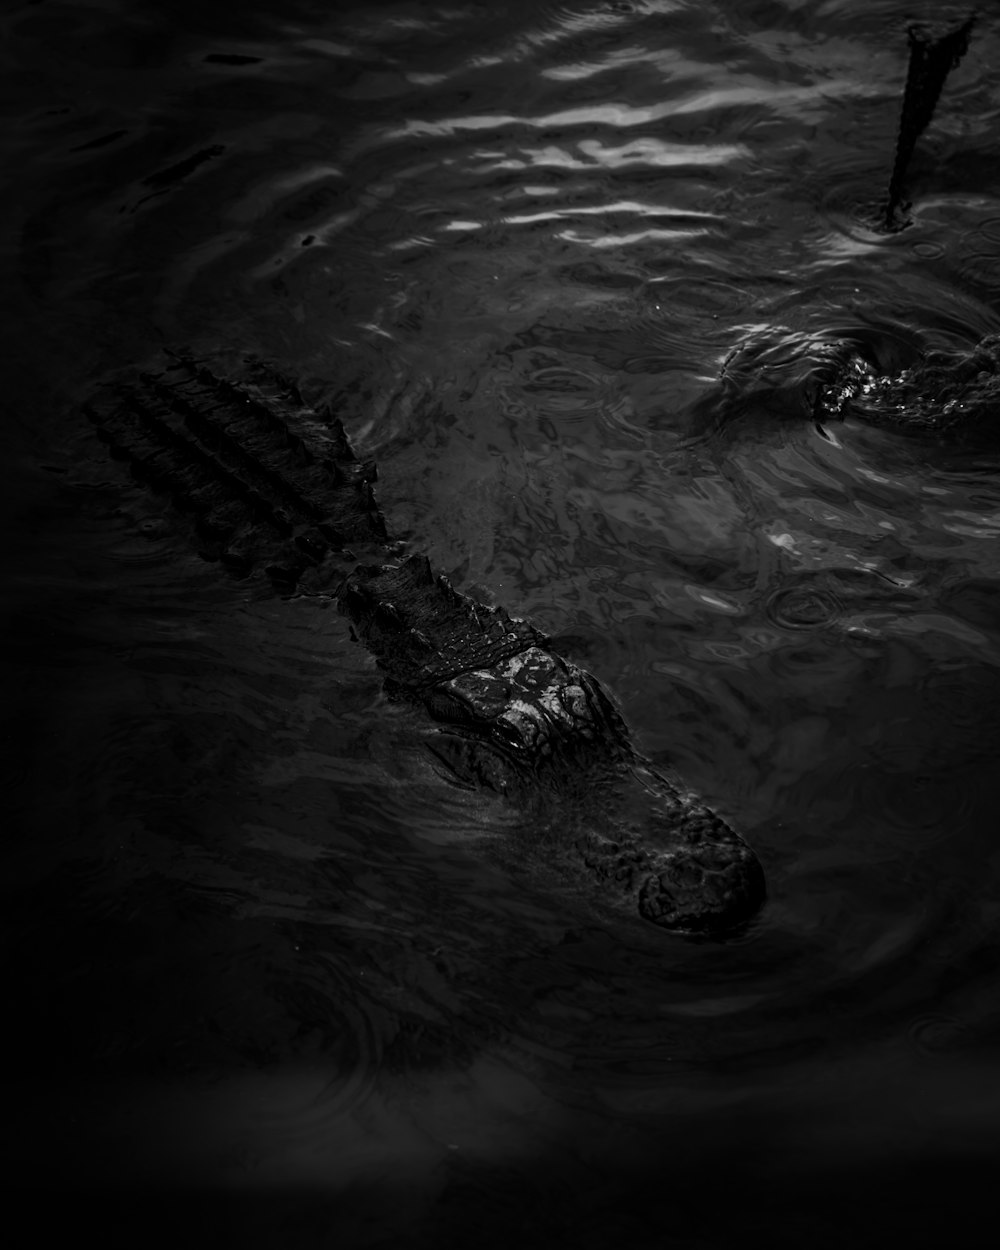 two alligators swimming in a body of water